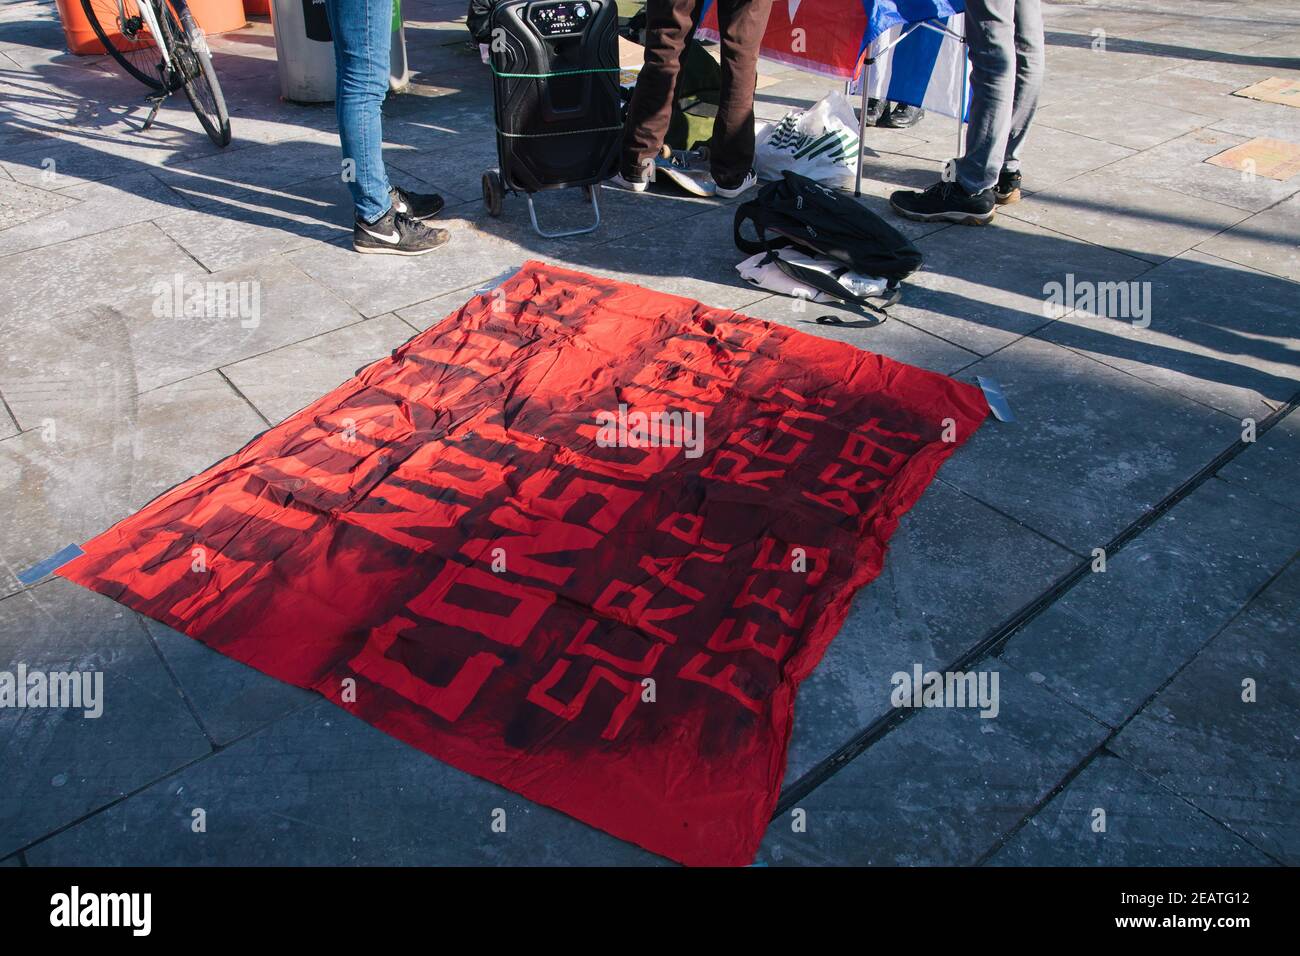 Student Rent Strike, Lower Marsh Street, London, UK 10th February 2021. a banner stating 'students not consumers' lies on the floor at the feet of protestors Credit: Denise Laura Baker/Alamy Live News Stock Photo